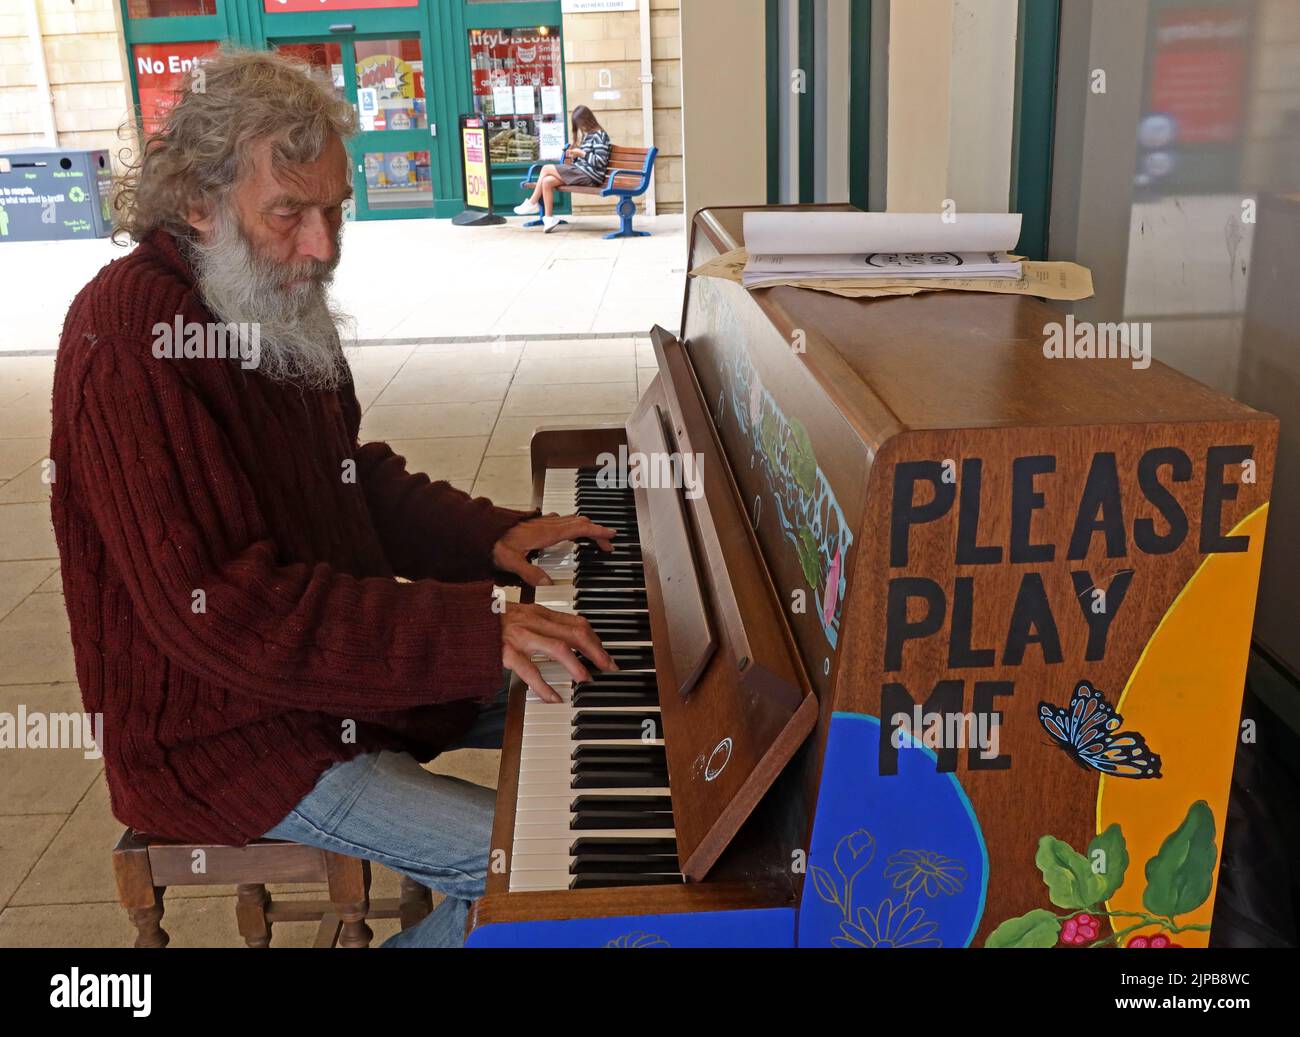 Public Community Piano,provided to play-Please Play Me, at West Street, Chipping Norton, West Oxfordshire, Oxfordshire, South East England,UK,OX7 5LH Stock Photo